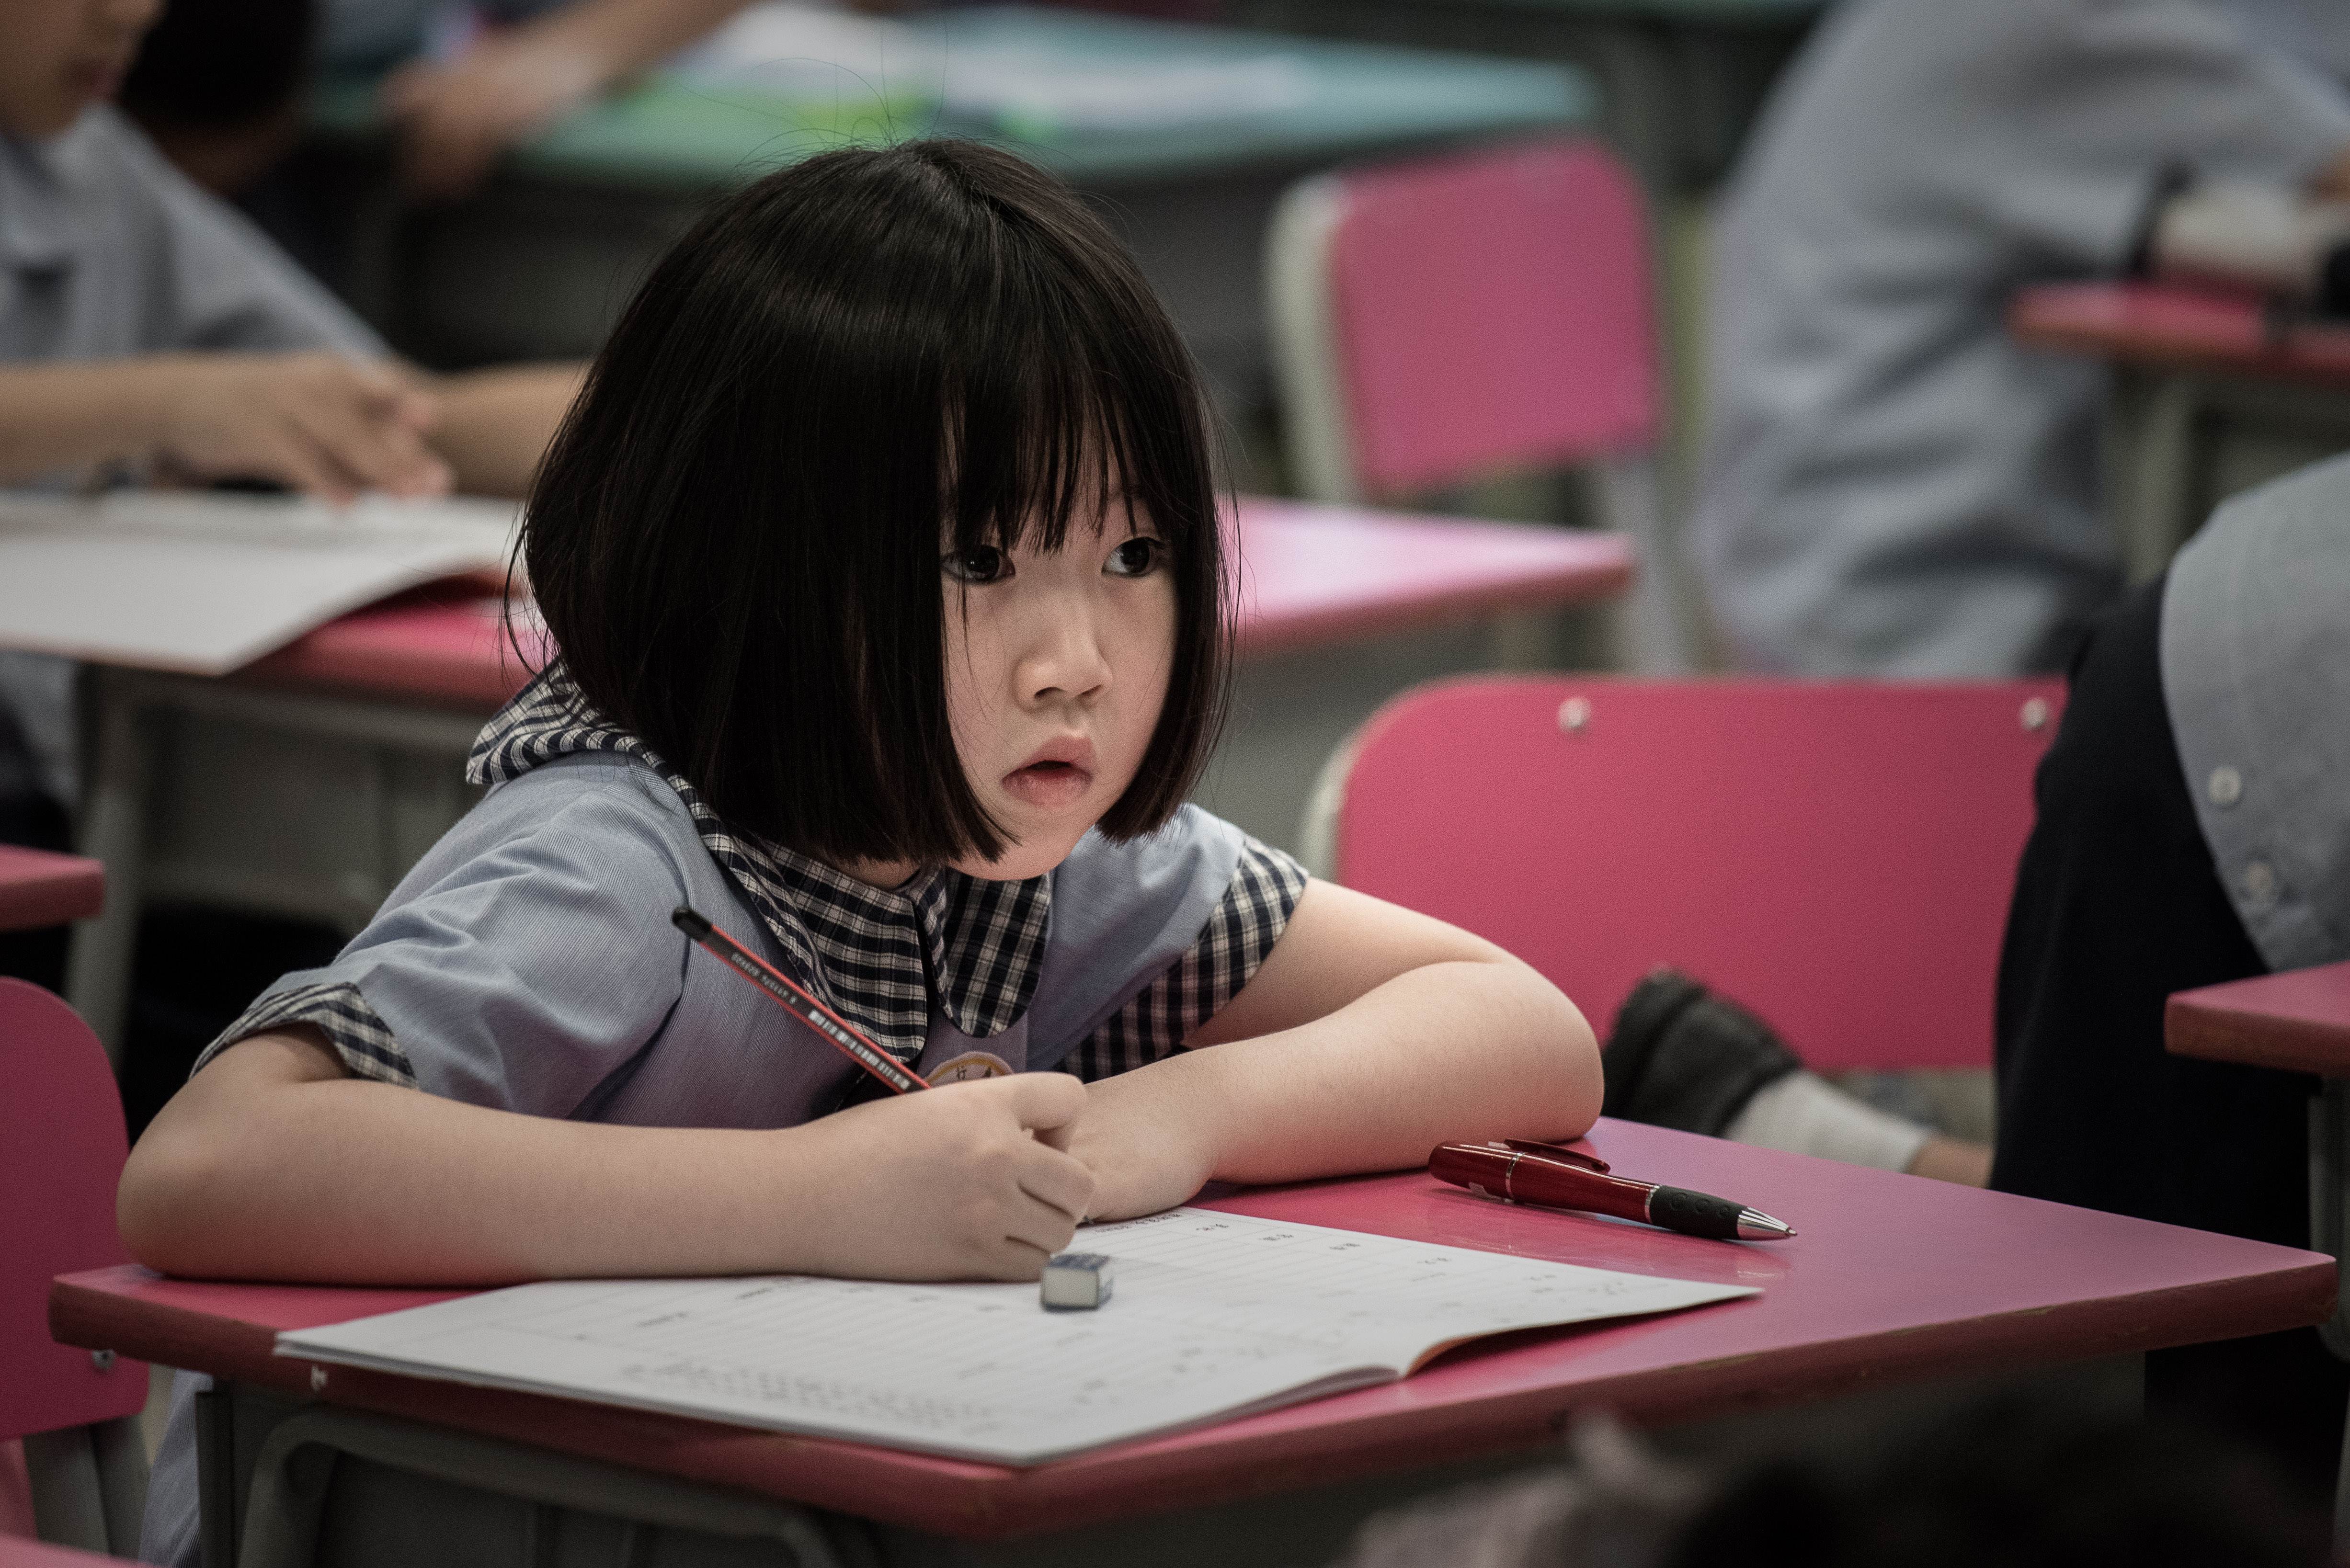 Hong Kong could research the nature of English proficiency and competence in today's globalised world, and develop innovative ways to teach them. Photo: AFP